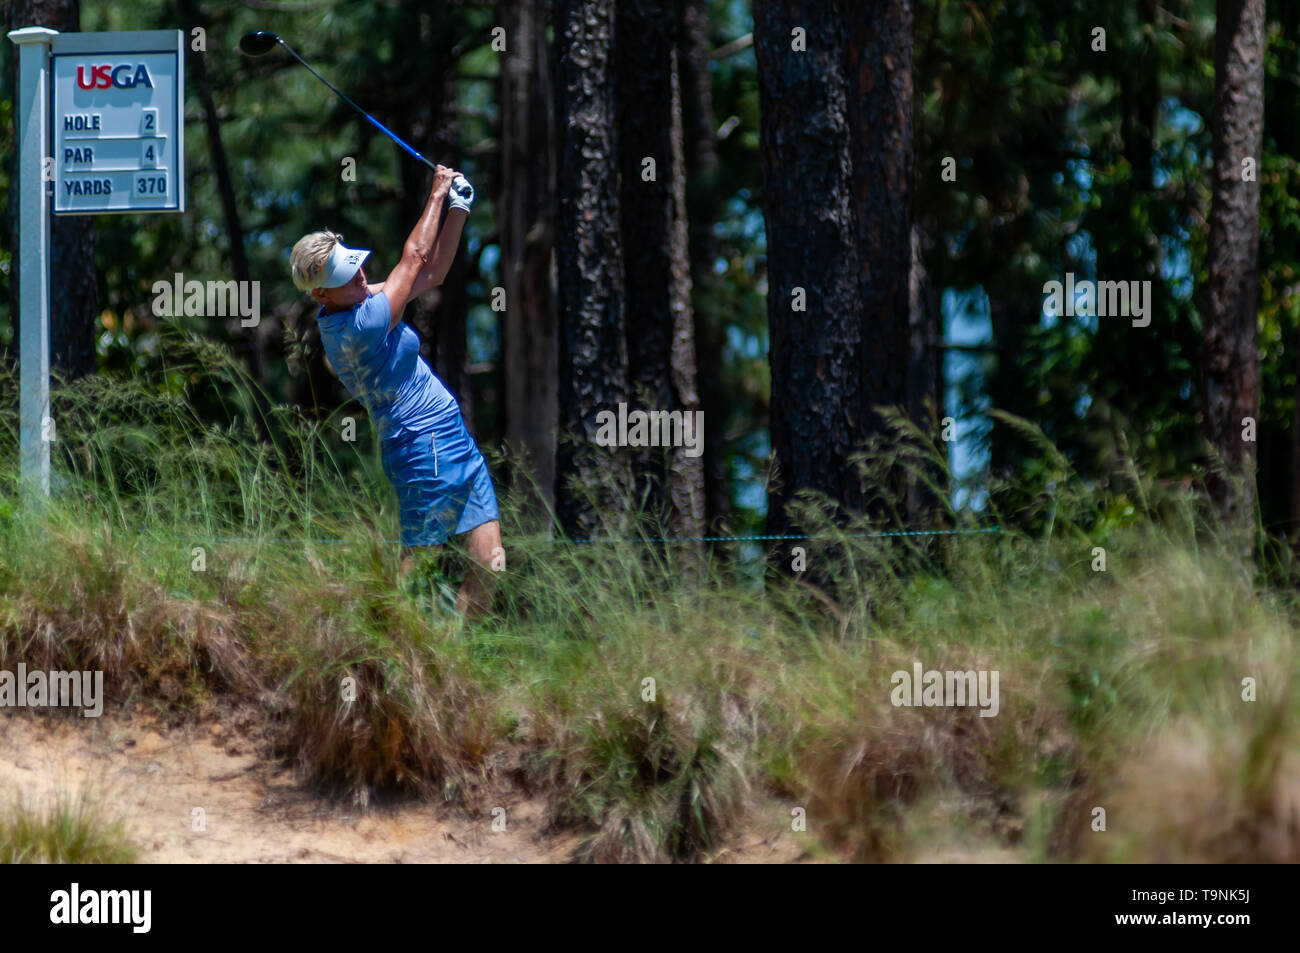 Southern Pines, North Carolina, USA. 19th May, 2019. May 19, 2019 - Southern Pines, North Carolina, US - TRISH JOHNSON of England plays her shot from the second tee during the final round of the USGA's 2nd U.S. Senior Women's Open Championship at Pine Needles Lodge & Golf Club, May 19, 2019 in Southern Pines, North Carolina. HELEN ALFREDSSON of Sweden won with a final round of 72, carding a 285 total for the tournament. Credit: Timothy L. Hale/ZUMA Wire/Alamy Live News Stock Photo